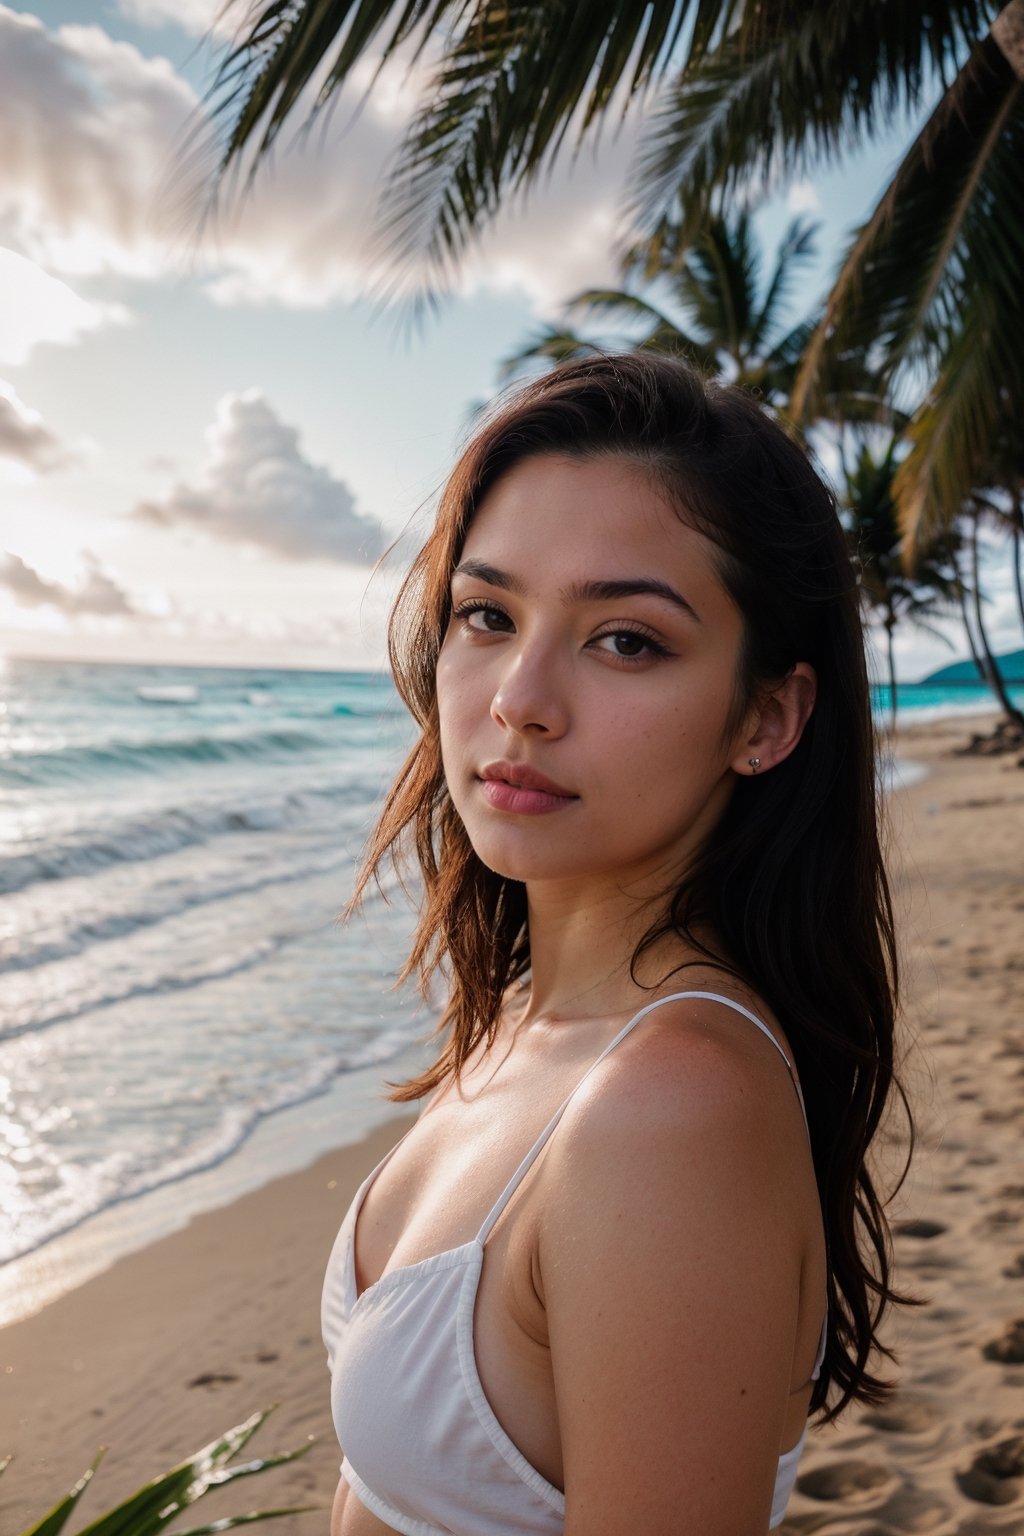 RAW photo, photo of girl called Tracy, instagram model(25yo), enjoying vacation in Hawaii, cool photography utilizing a 85mm lens for a cinematic feel,photorealistic